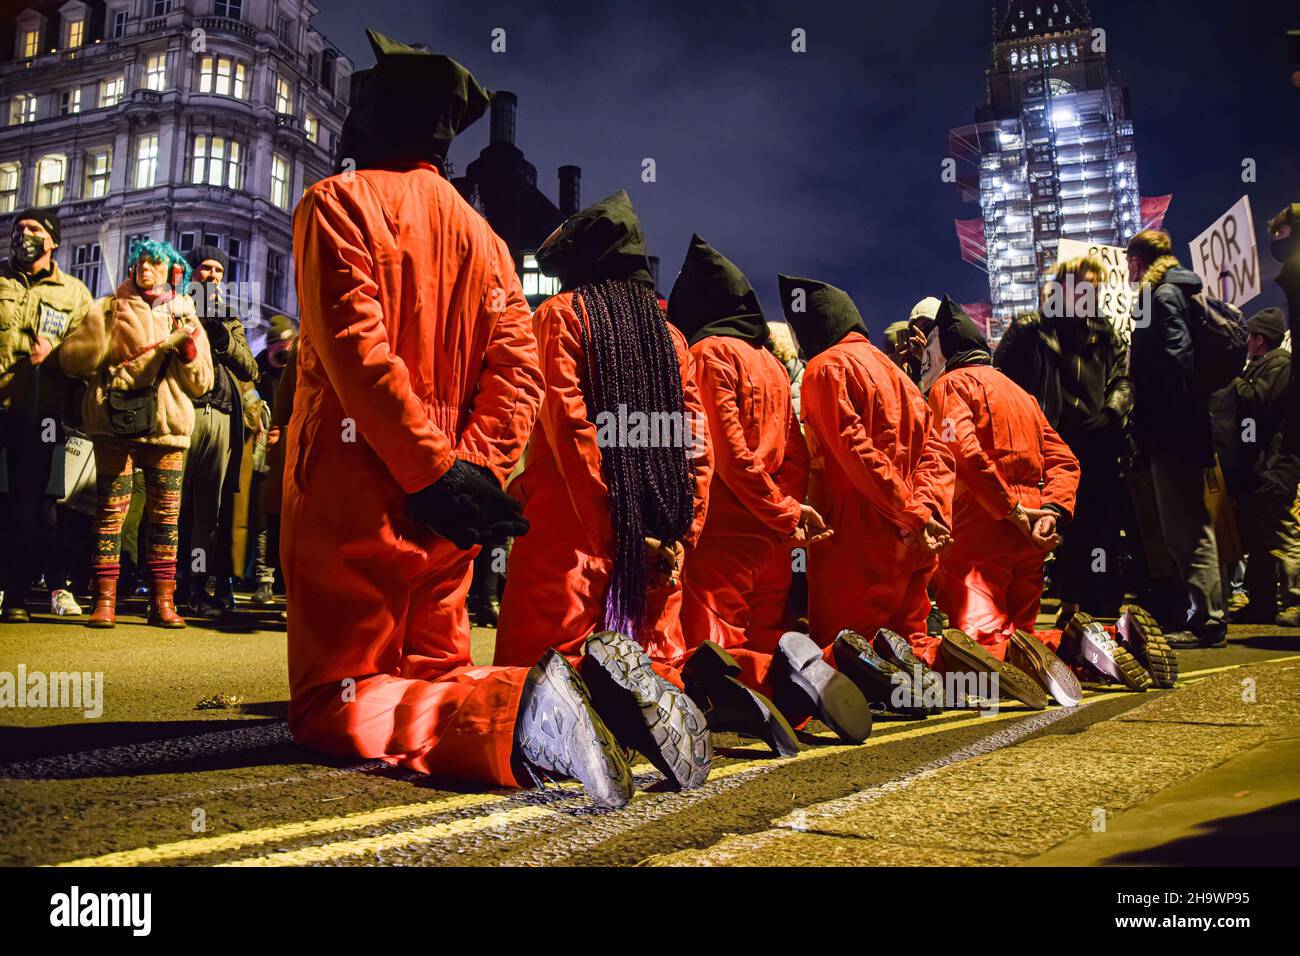 Protesters Kneel On The Ground While Wearing Wearing Prison Costumes And Masks During The 3392